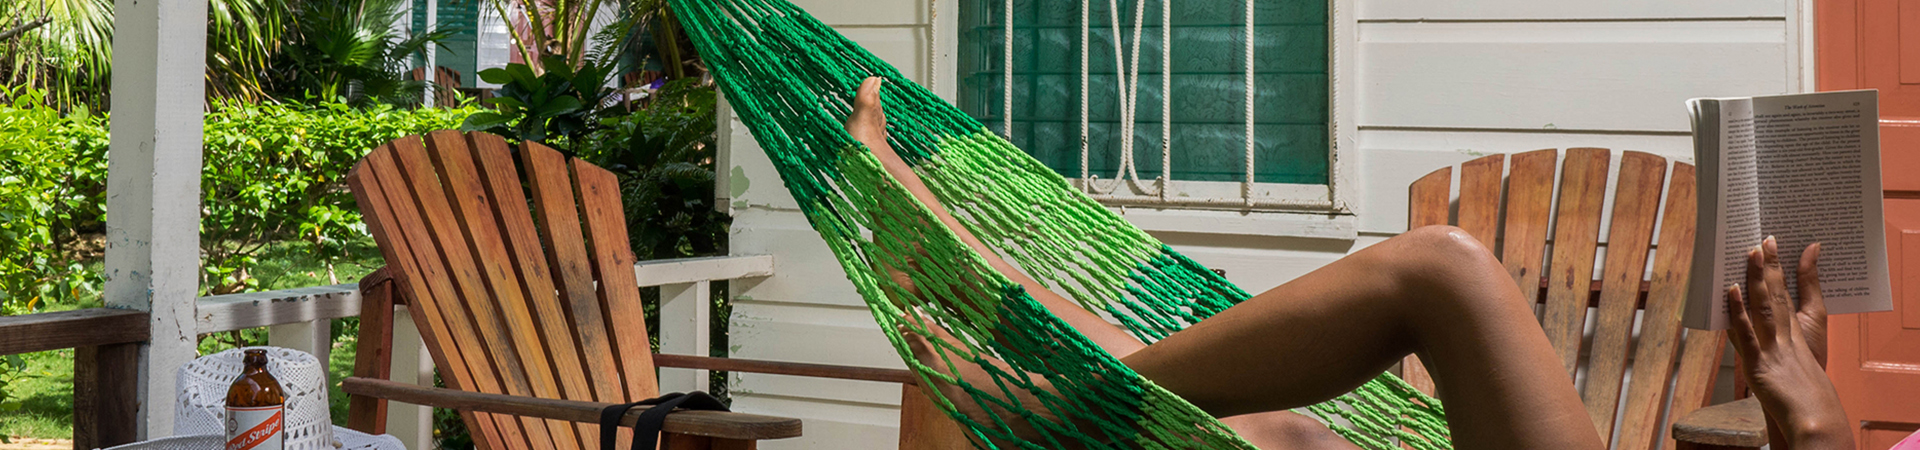 woman relaxing and reading book in green hammock on patio